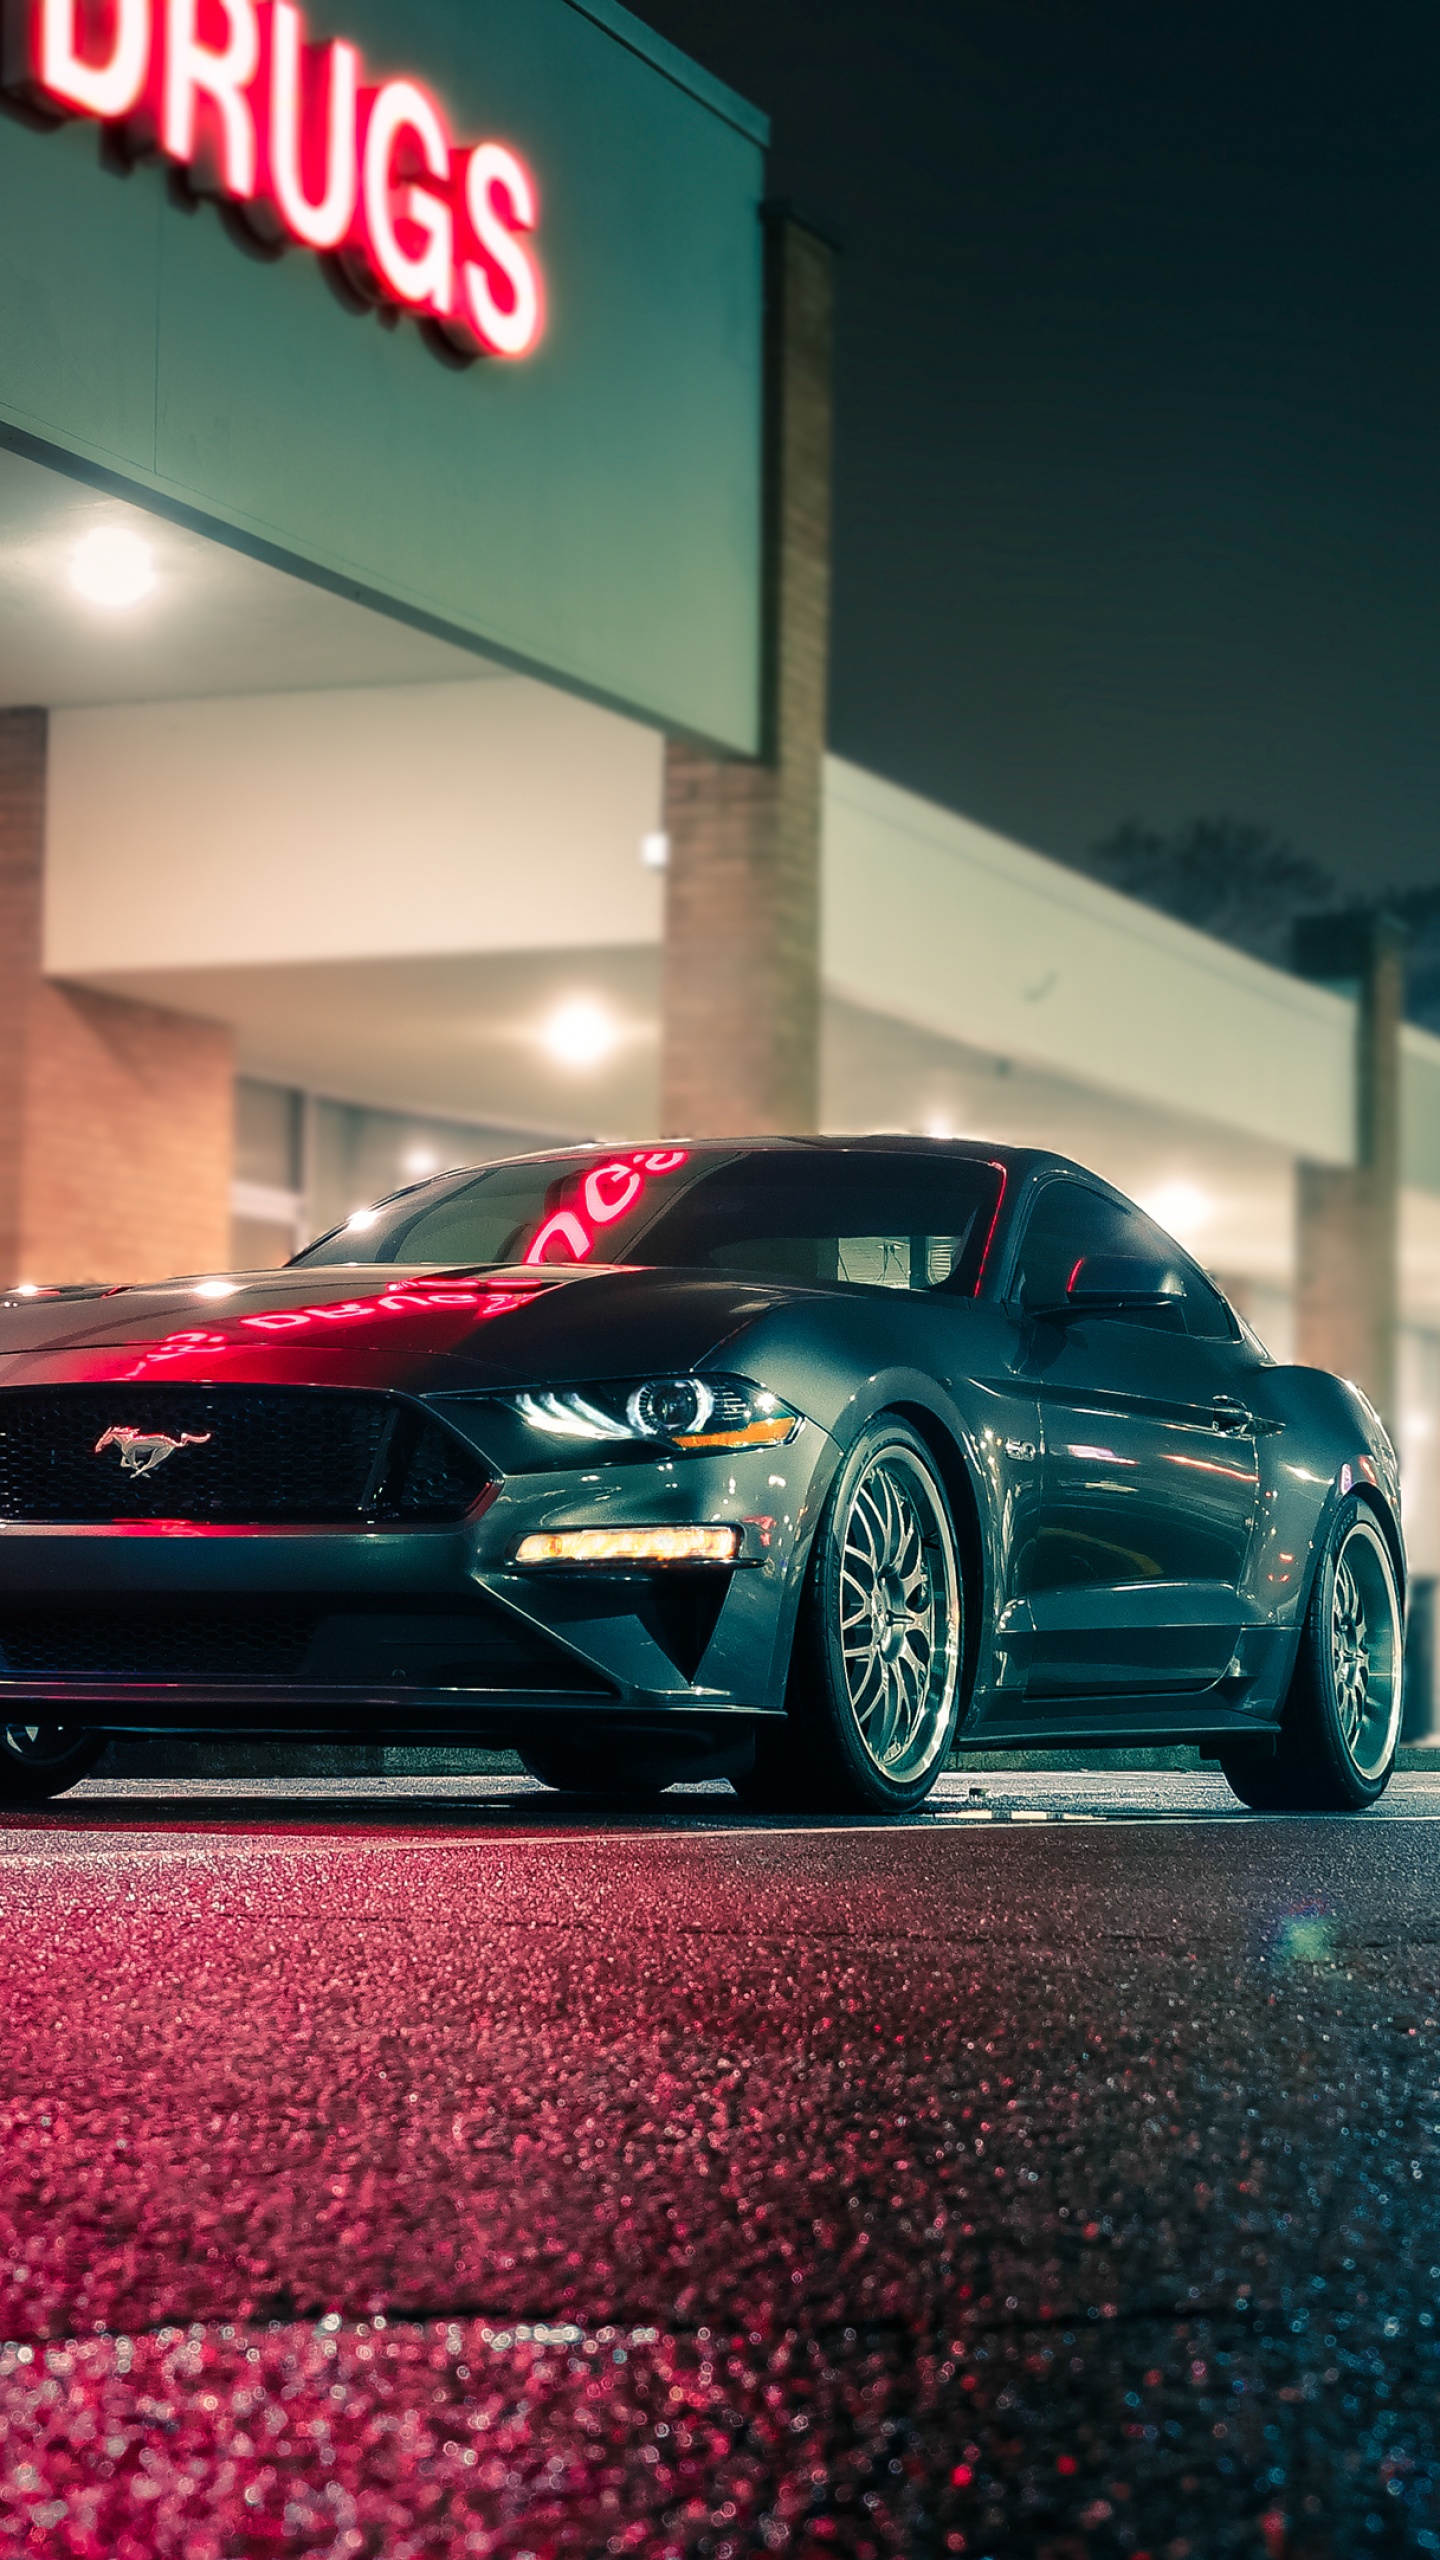 Mustang GT wallpaper by Daxpatel83 - Download on ZEDGE™ | 4678